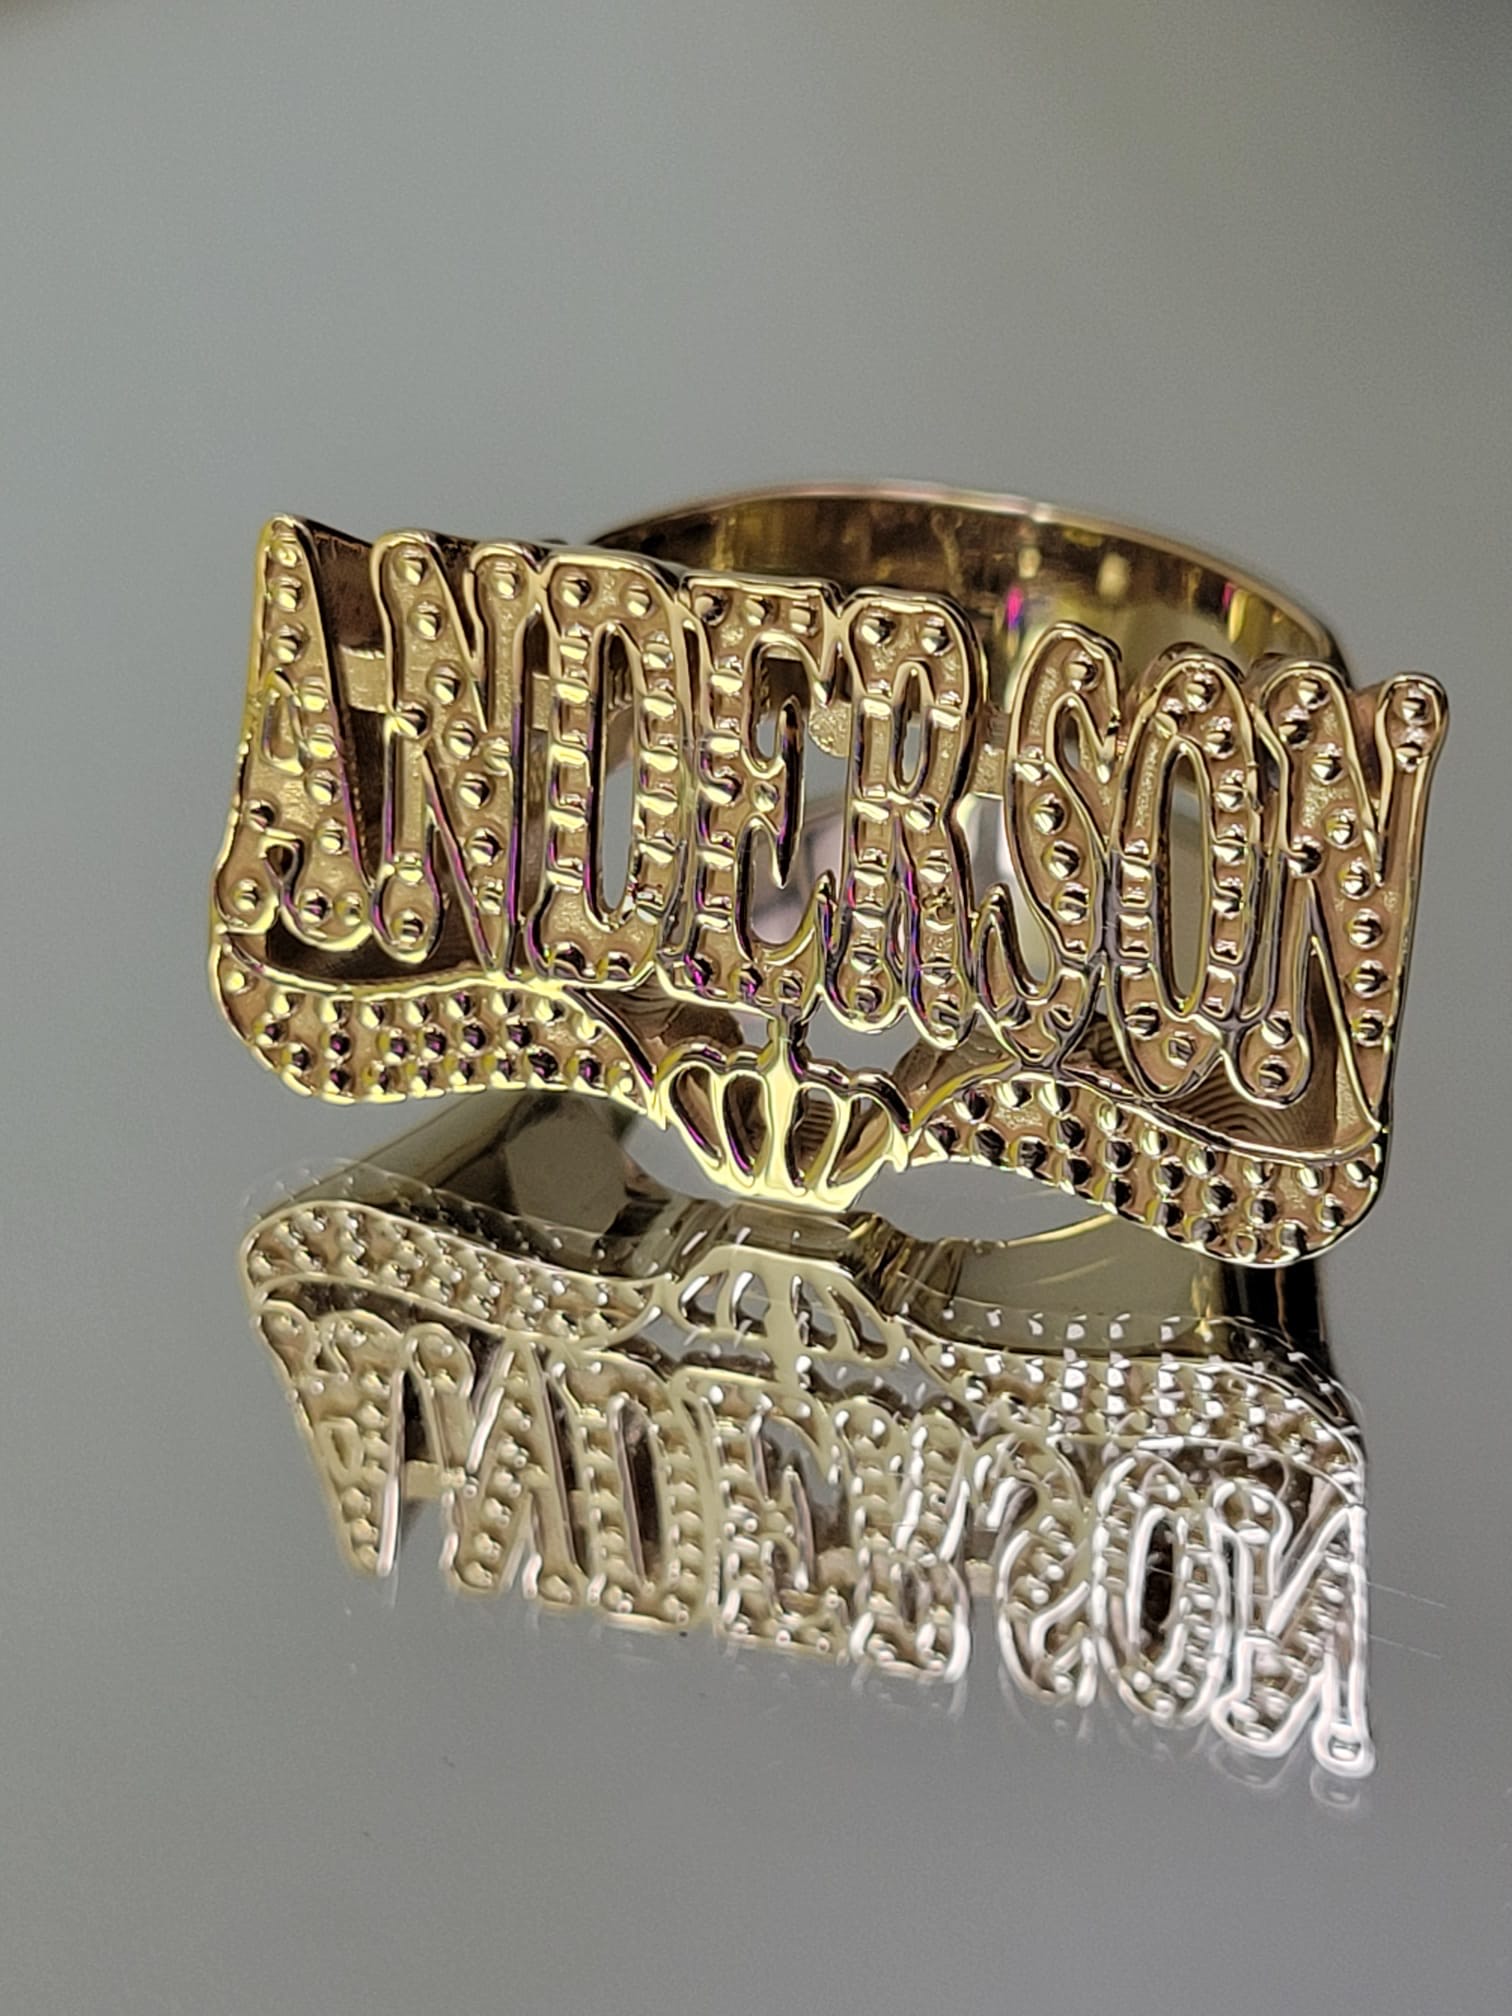 Anderson name ring